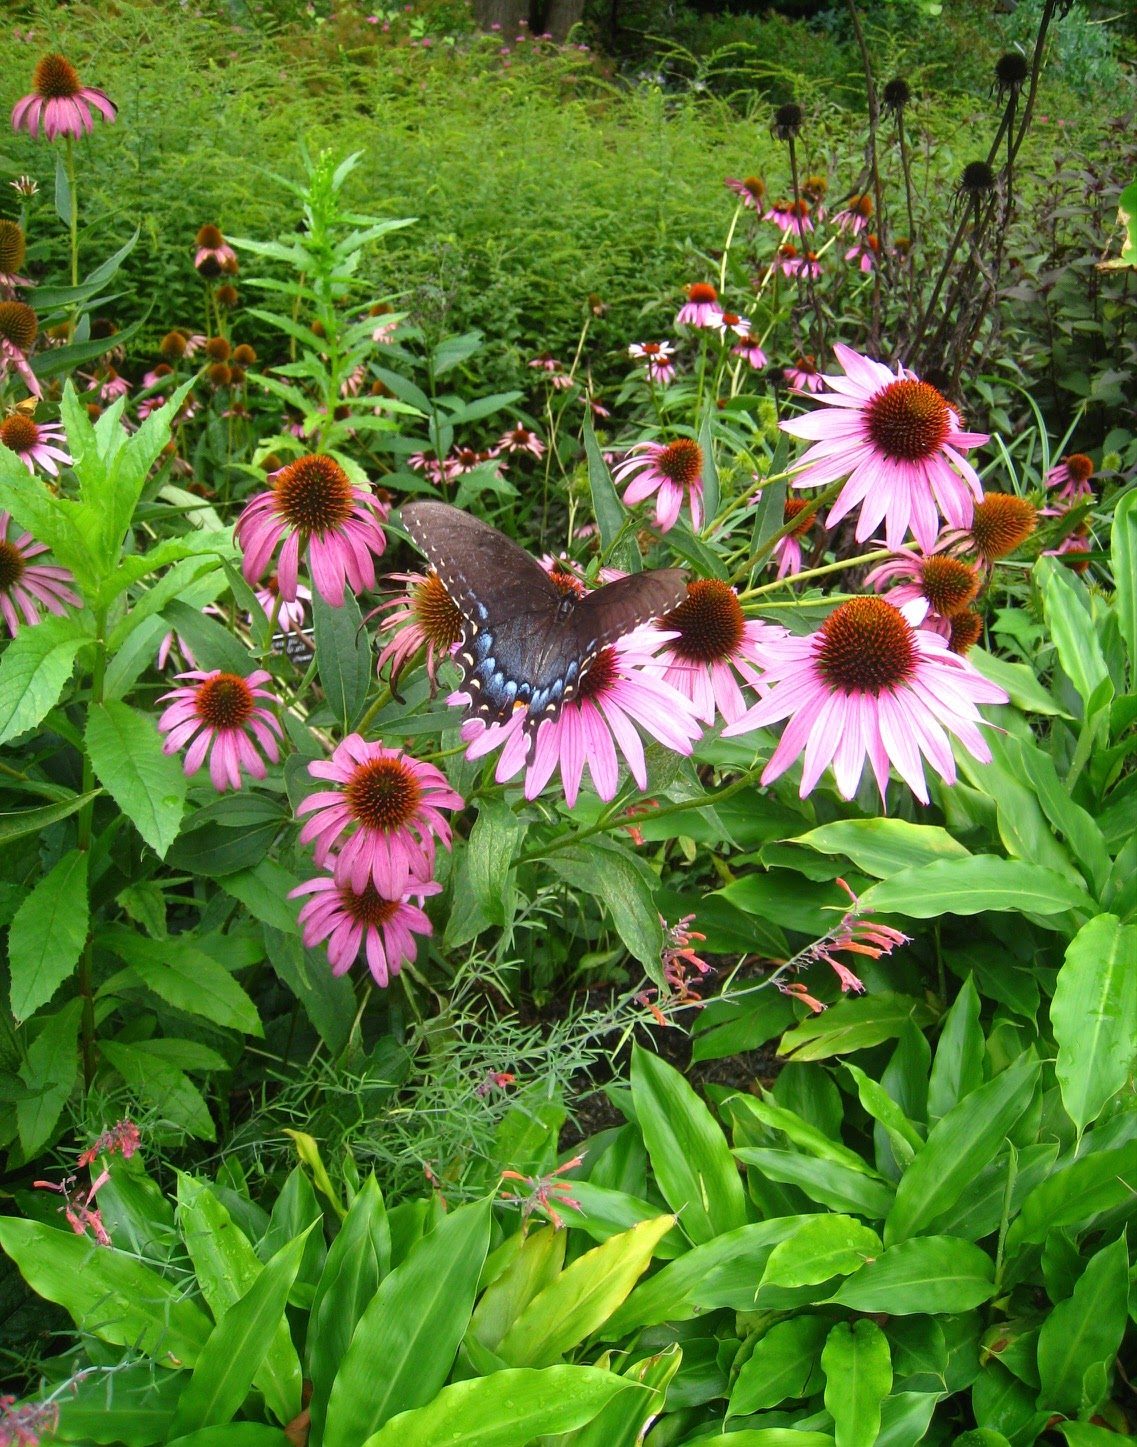 A+Black+Swallowtail+butterfly+lands+on+a+Purple+Coneflower%2C+enjoying+the+nectar.